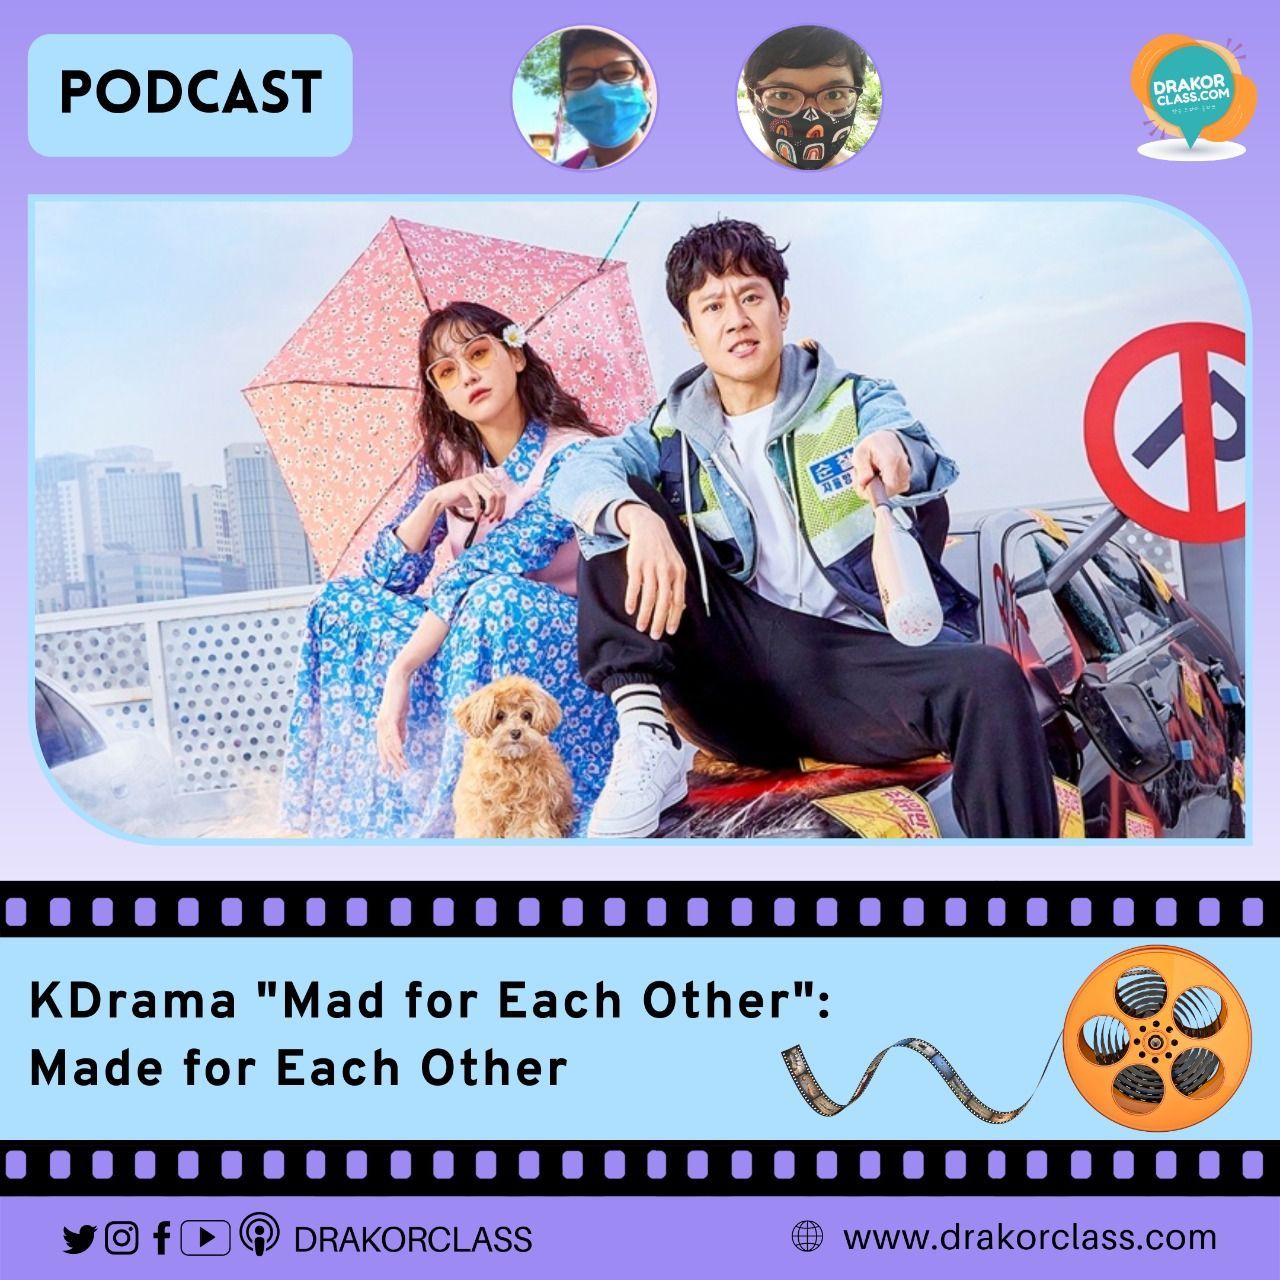 Sekilas Podcast K-Drama “Mad for Each Other”